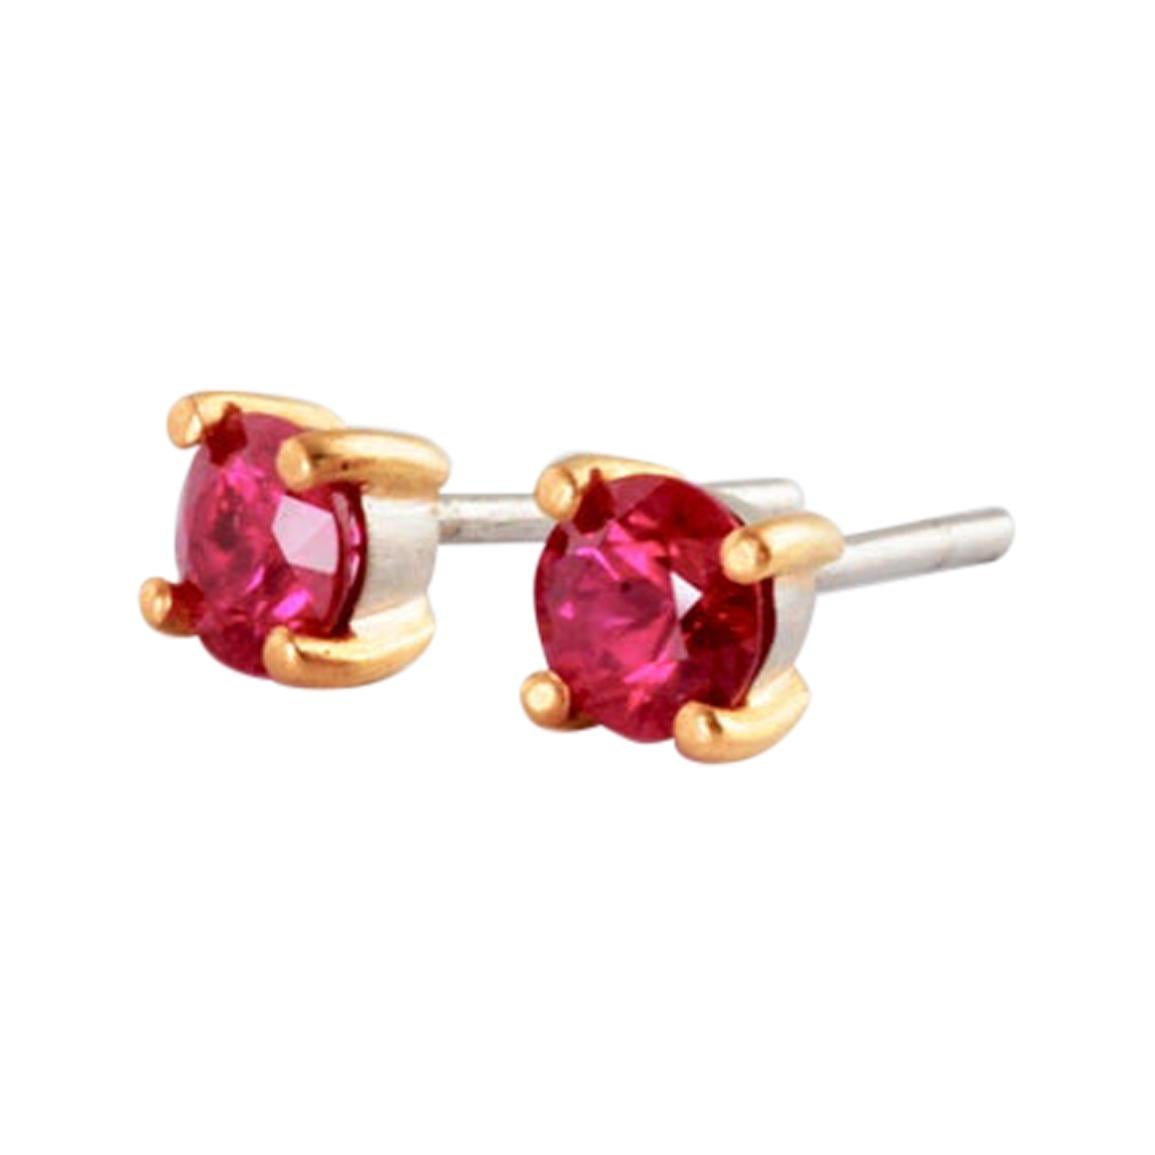 Ruby Platinum Stud Earrings 1.12 Carat Total 22 Carat Gold Claws